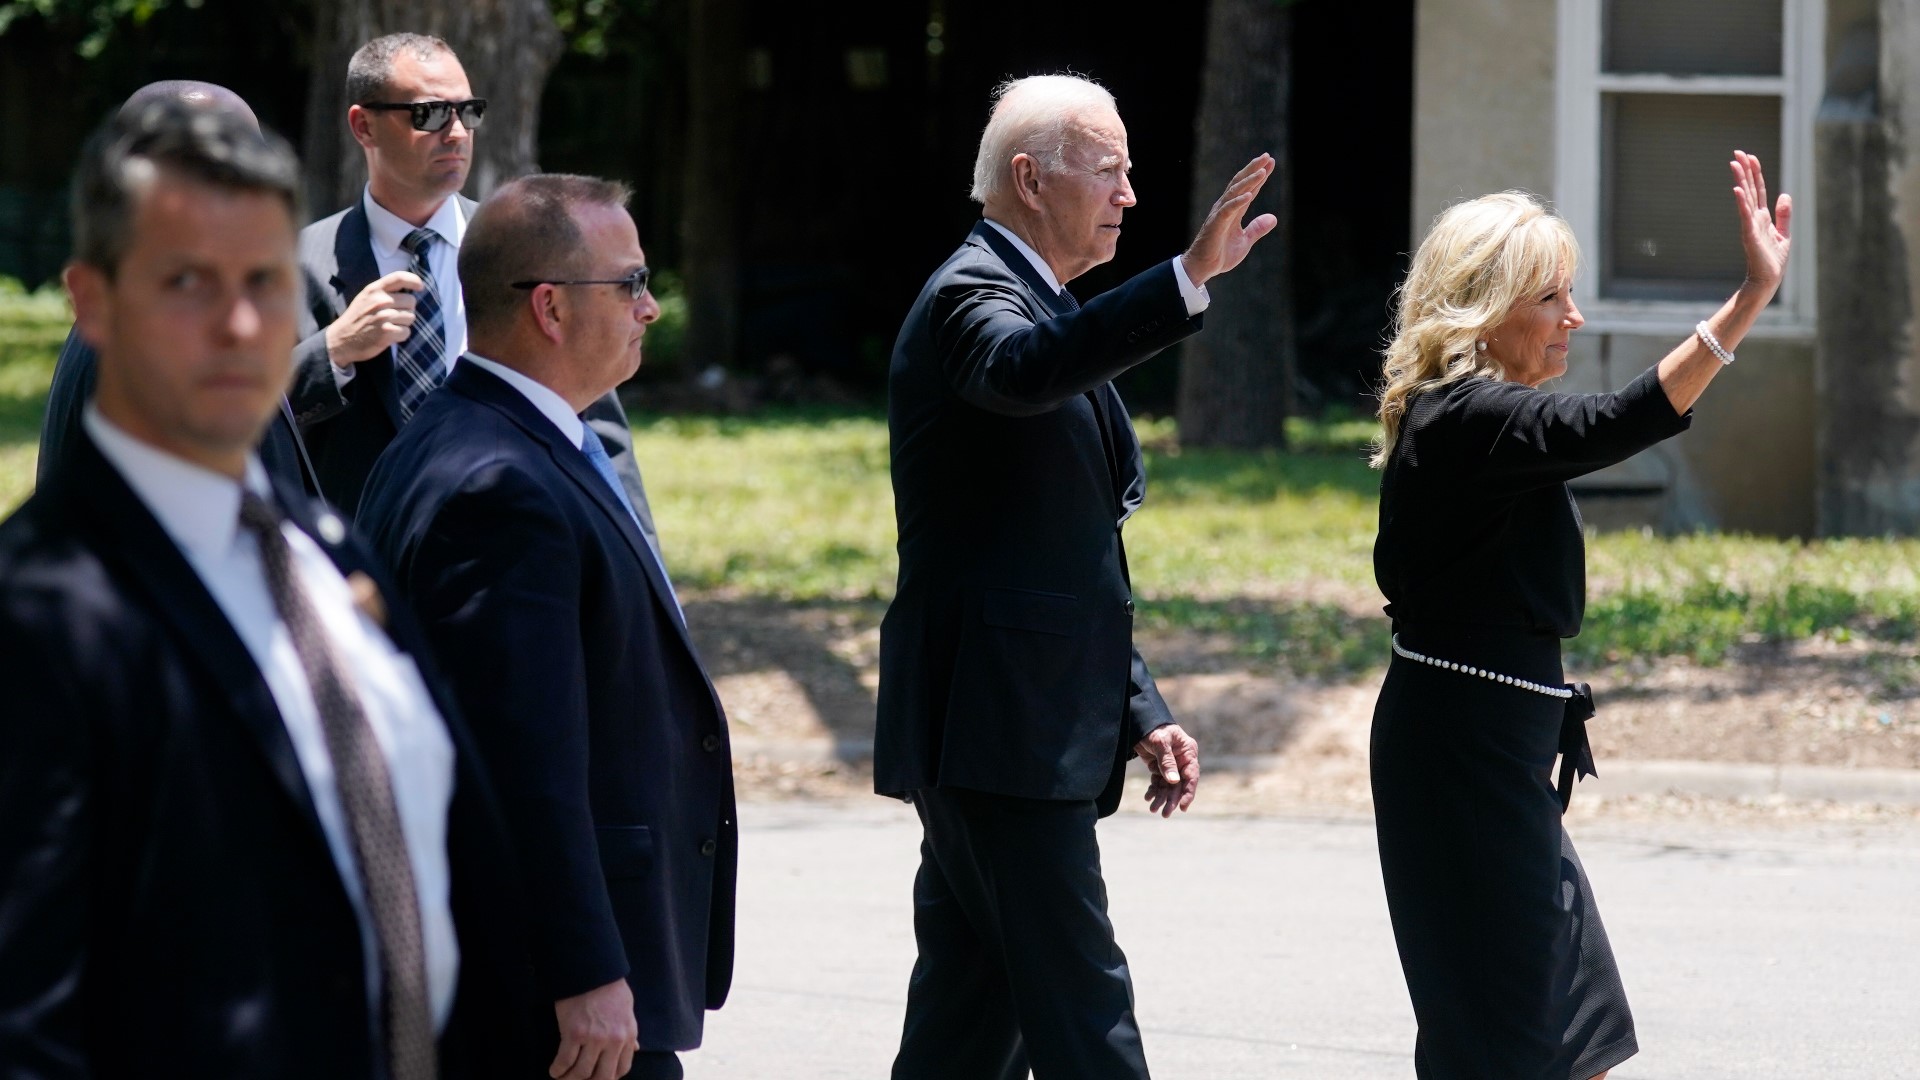 The president, along with first lady Jill Biden, were in the south Texas community for several hours to grieve with families devastated by the shooting.